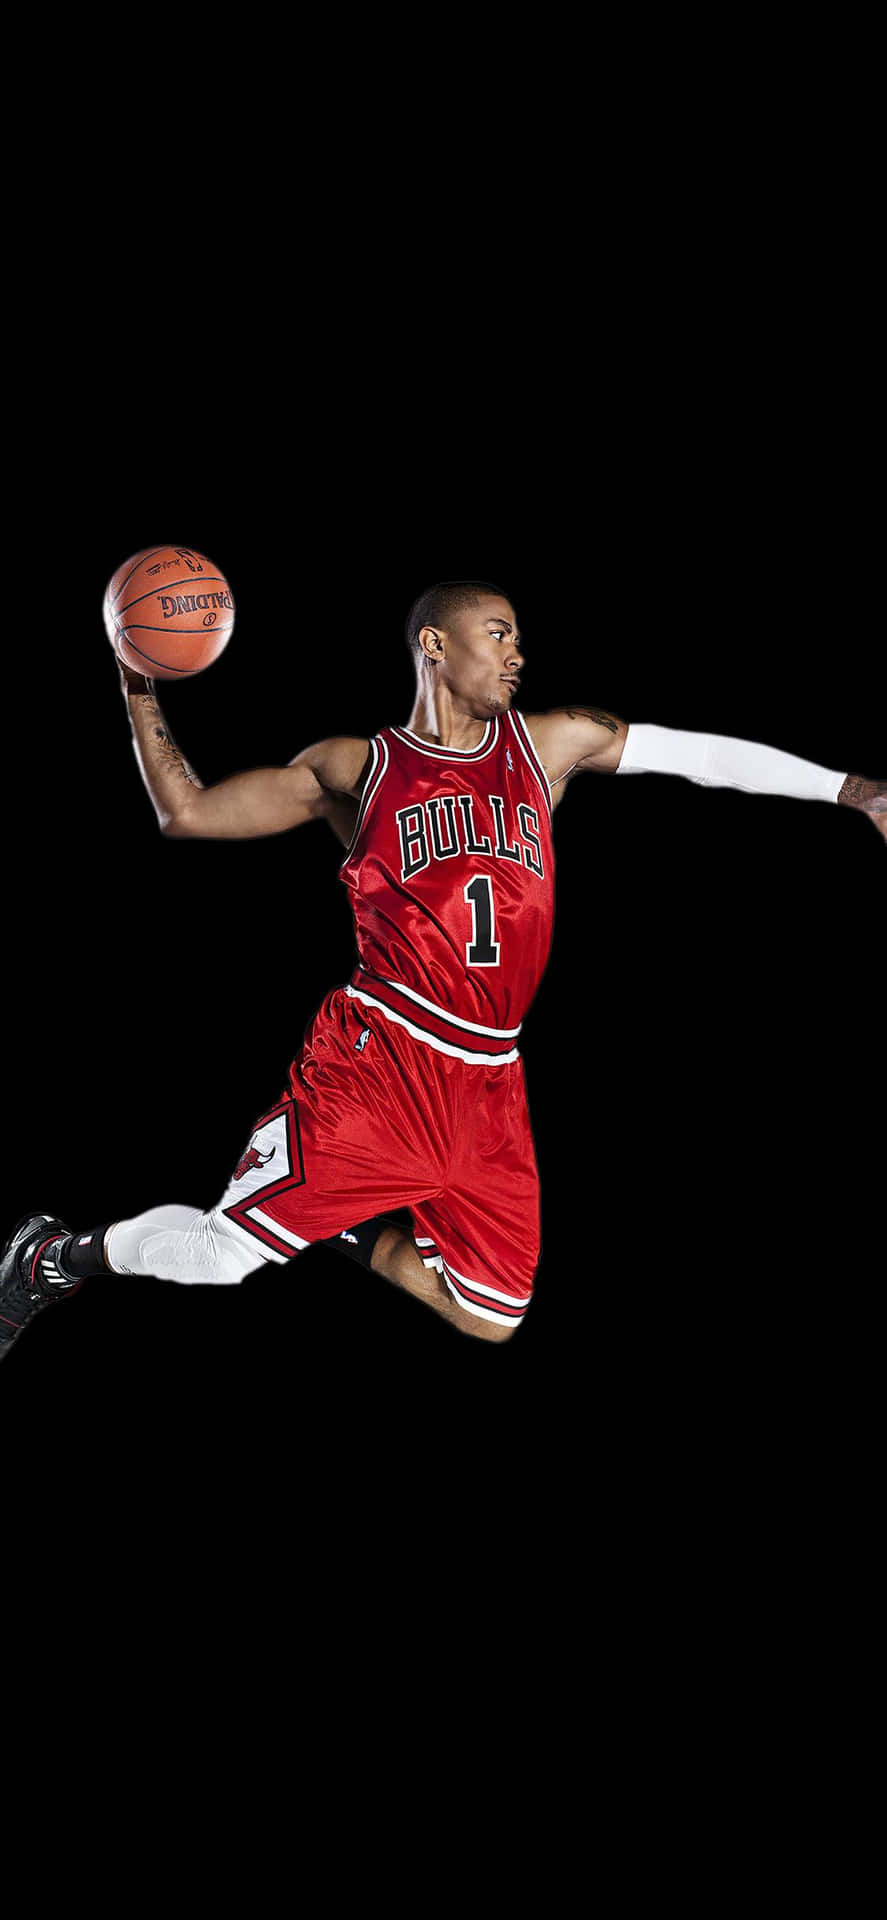 Get the Latest Updates on the Chicago Bulls with this Phone Wallpaper